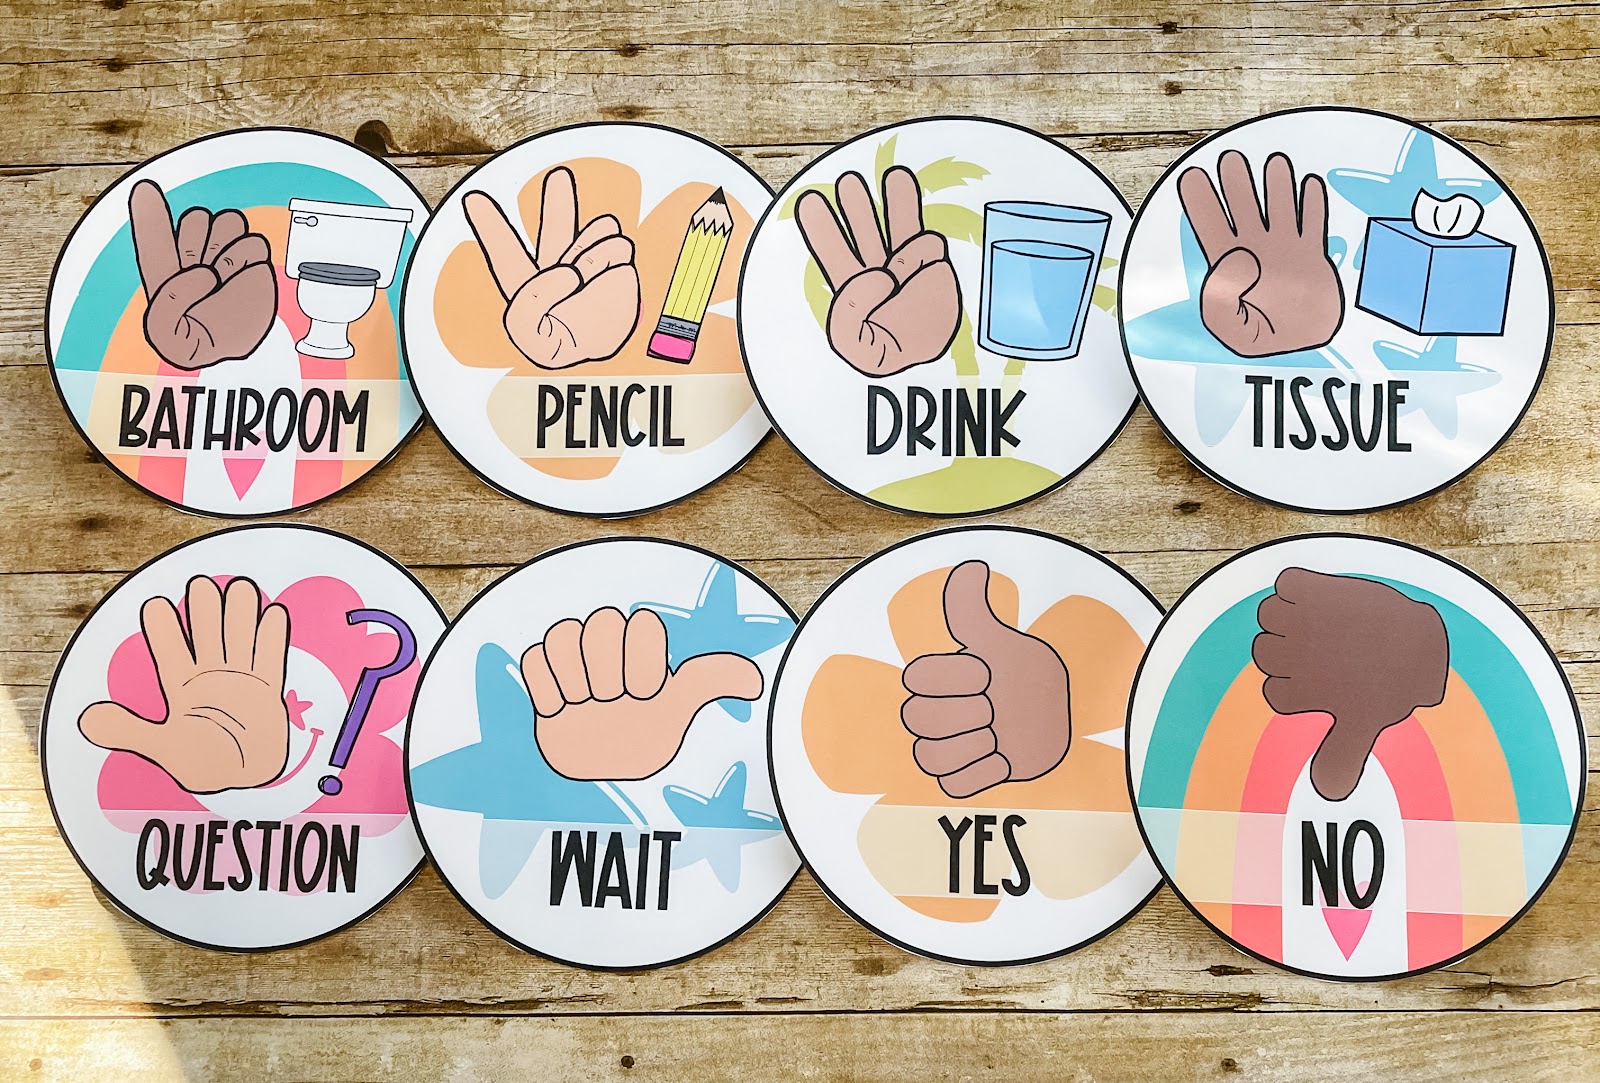 This image shows six hand-signal posters. The posters are circular and include a label (bathroom, pencil, drink, question, wait, and yes), hand signal, and icon for what they are helping students ask for. 